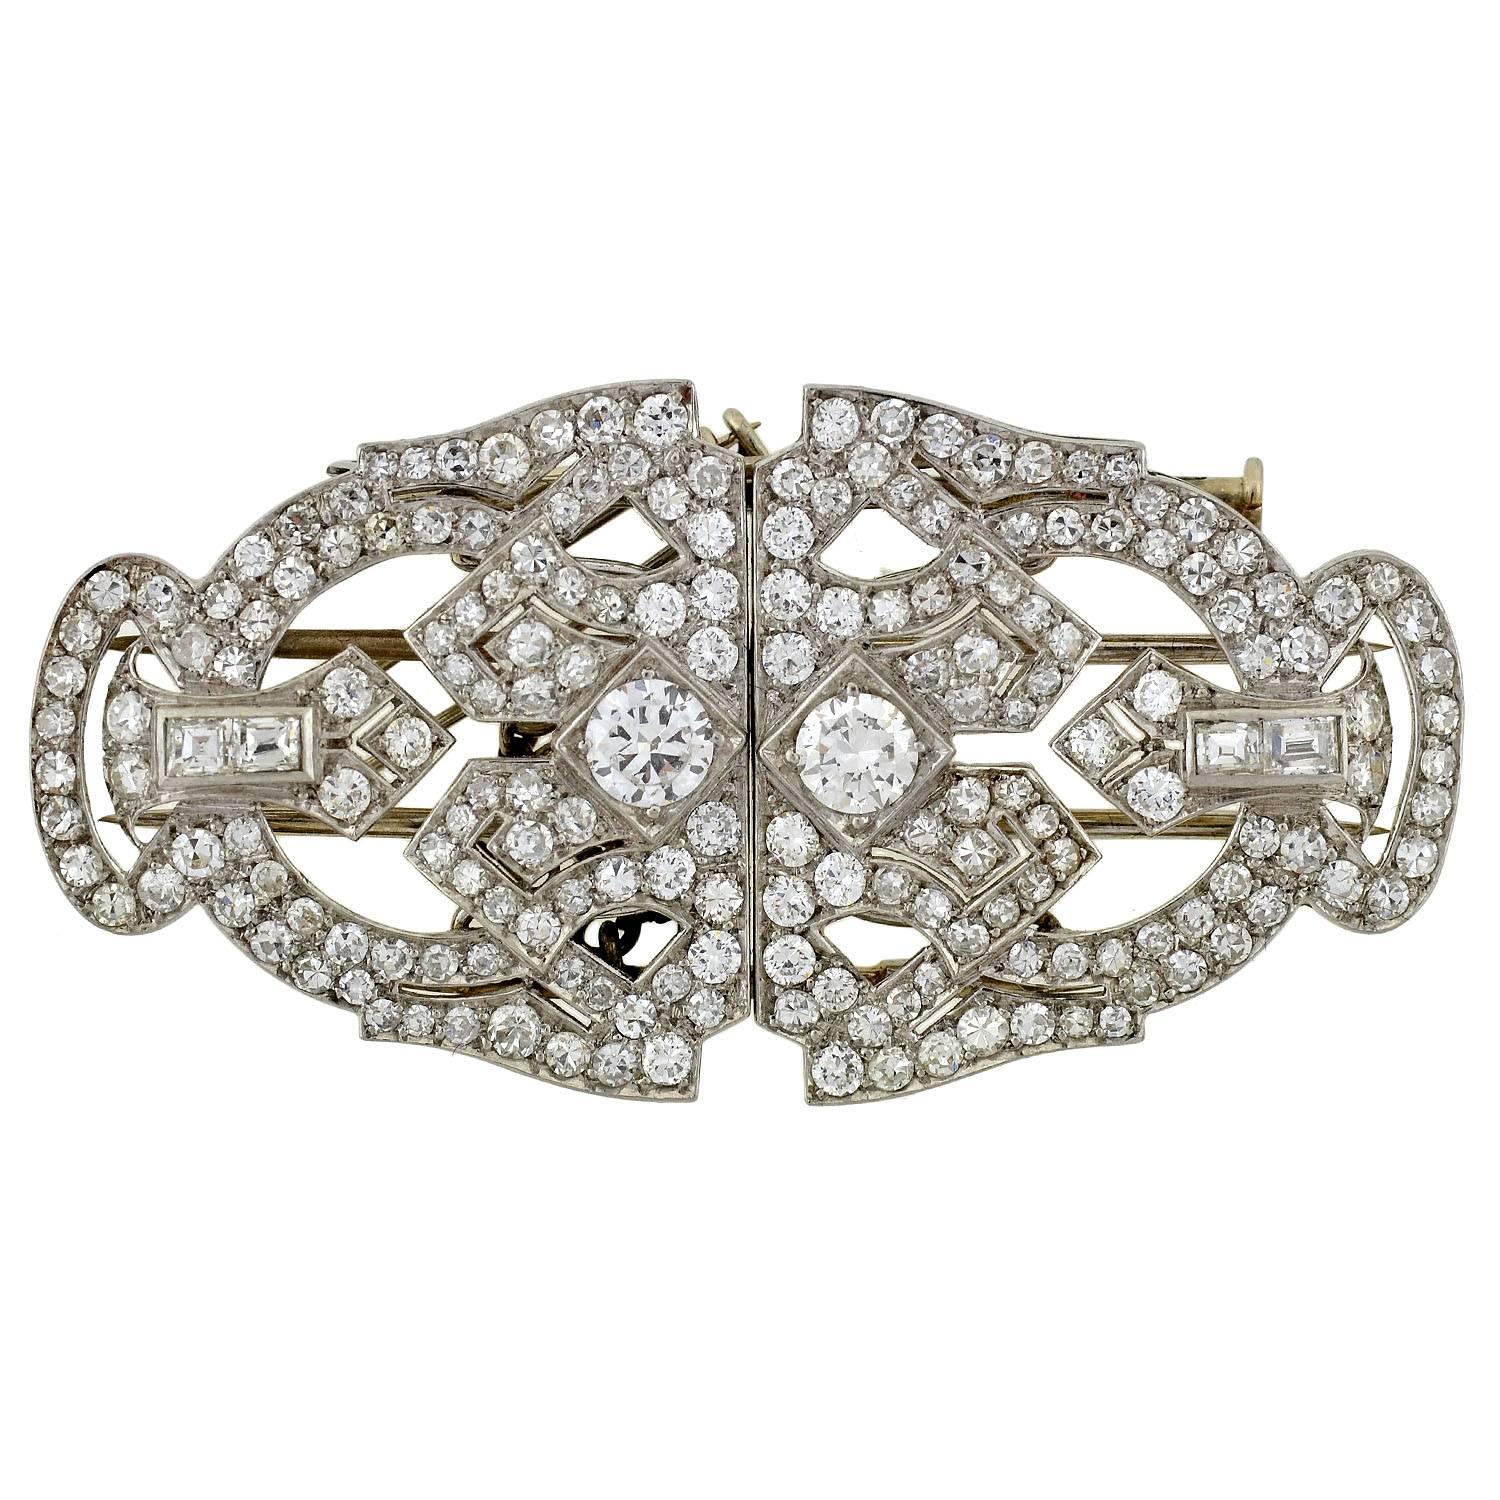 An absolutely exquisite platinum and diamond pin clips from the Art Deco (ca1920) era! This wonderful and unusual piece is made of platinum and encrusted with 3.51 carats of sparkling diamonds. Comprised of 2 fur clips that are secured within an